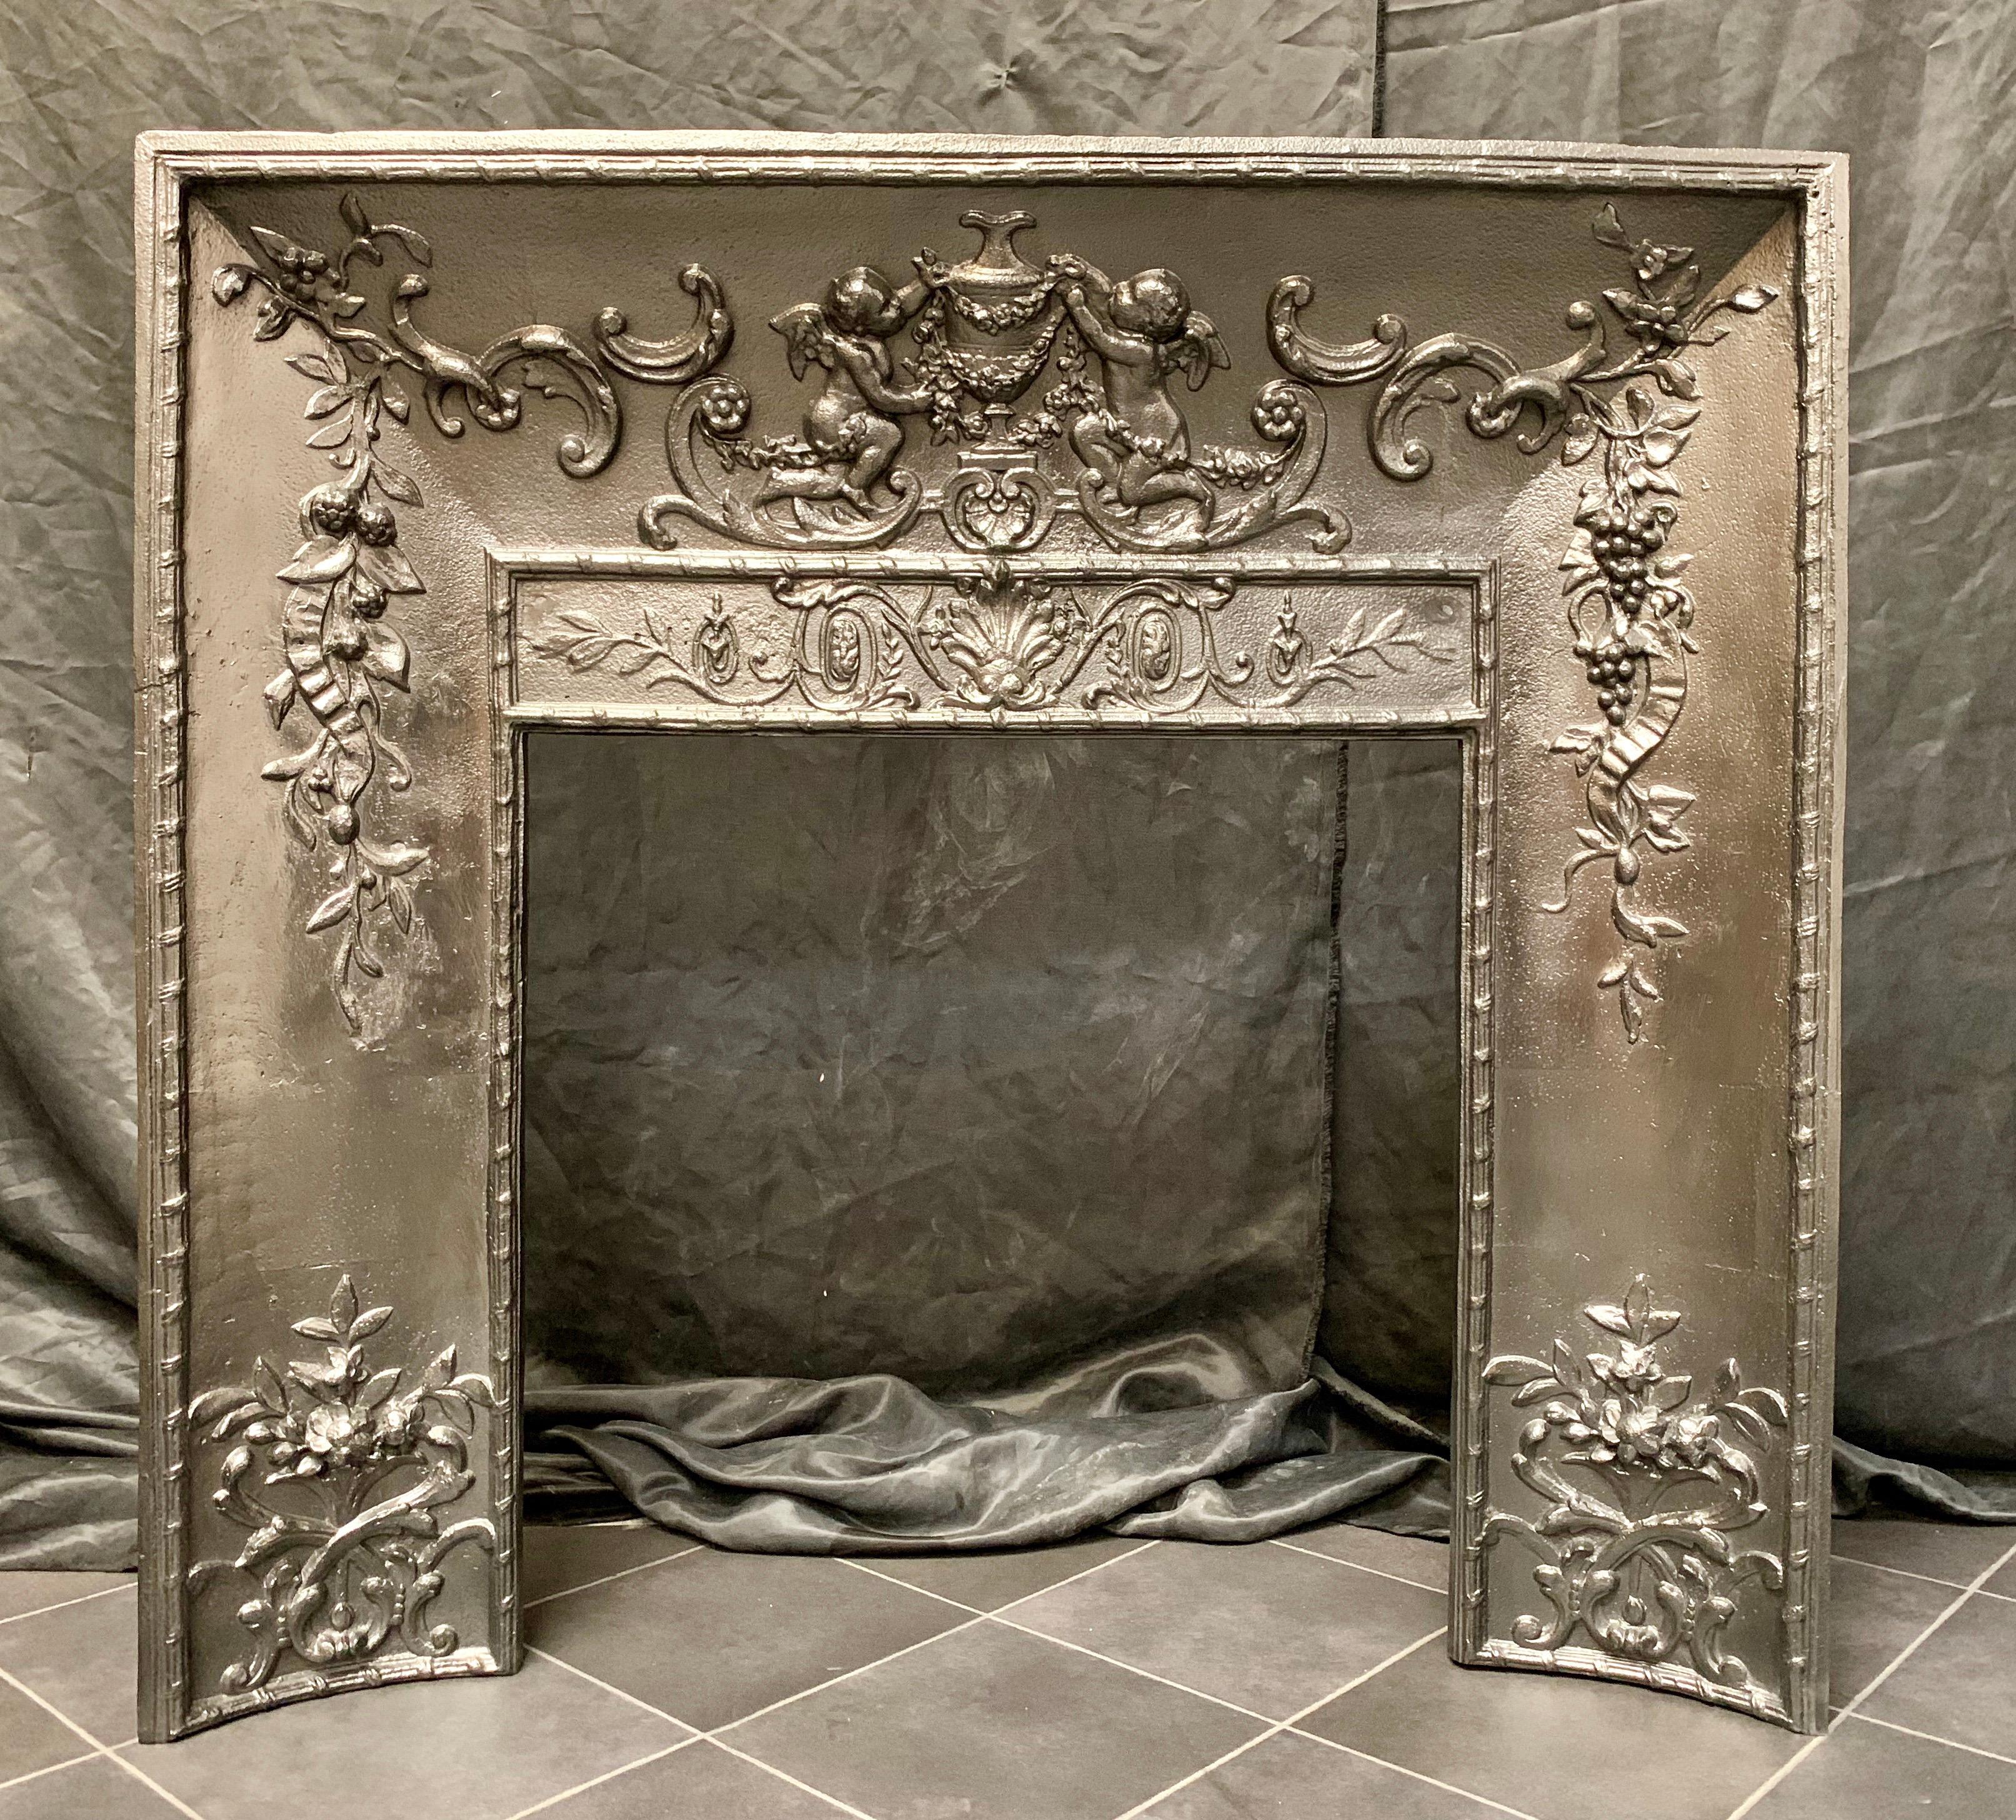 A mid-19th century French cast iron foliate fireplace insert with a centralised urn and swags flanked by a pair of putti.
Inside fire opening size: 575mm wide x 573mm high
Overall insert sizes: 958mm wide x 905mm high x 110mm depth.

French,